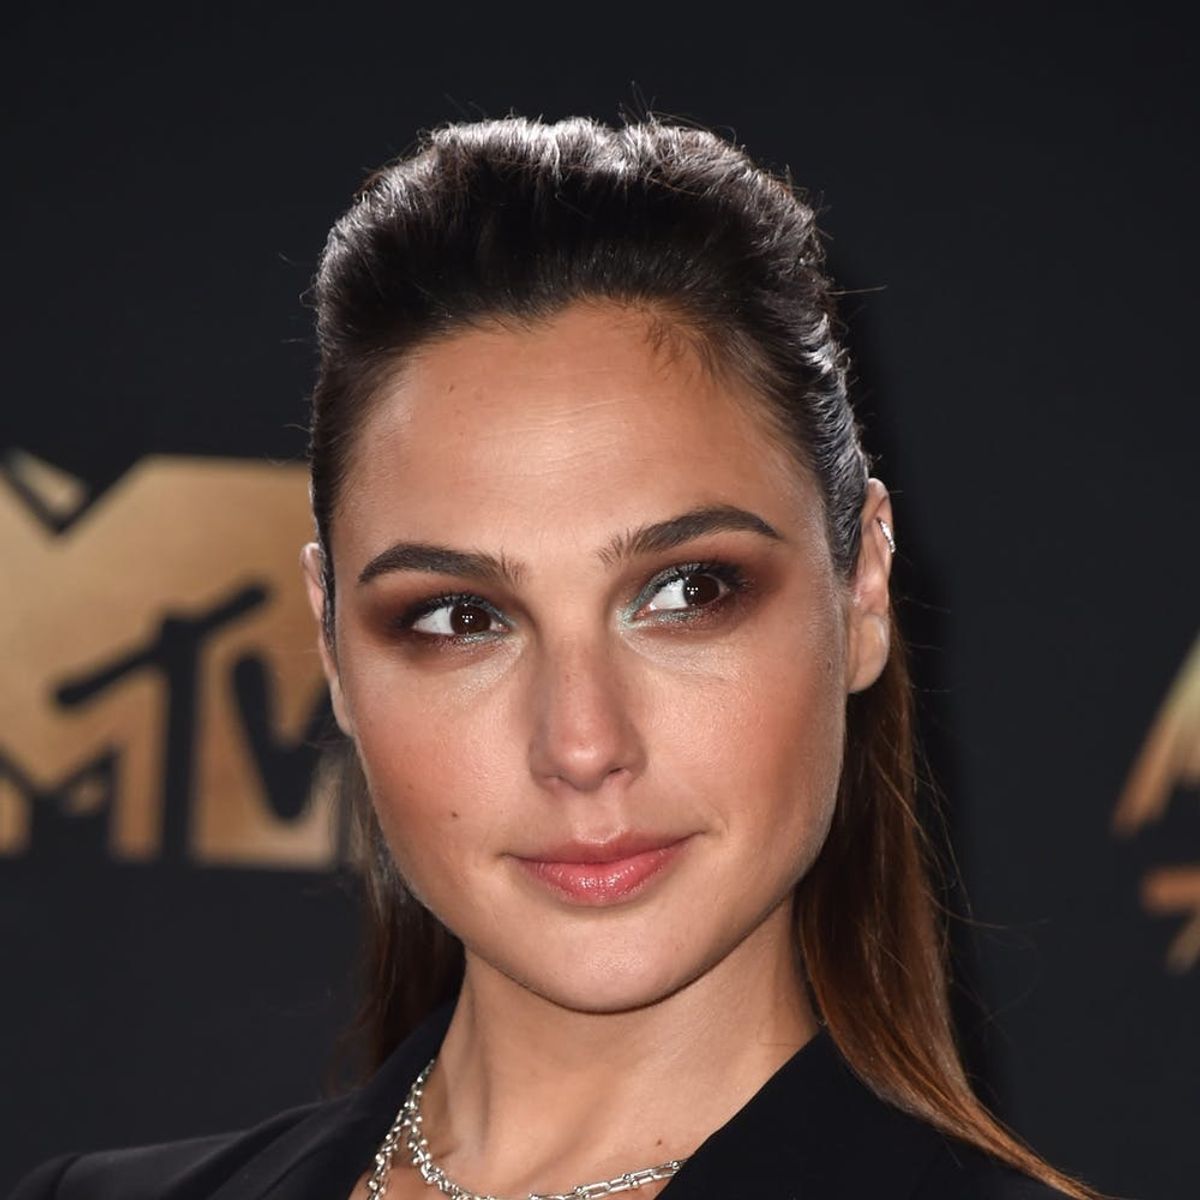 Gal Gadot Has a Gracious Response to the Wonder Woman Pay Controversy